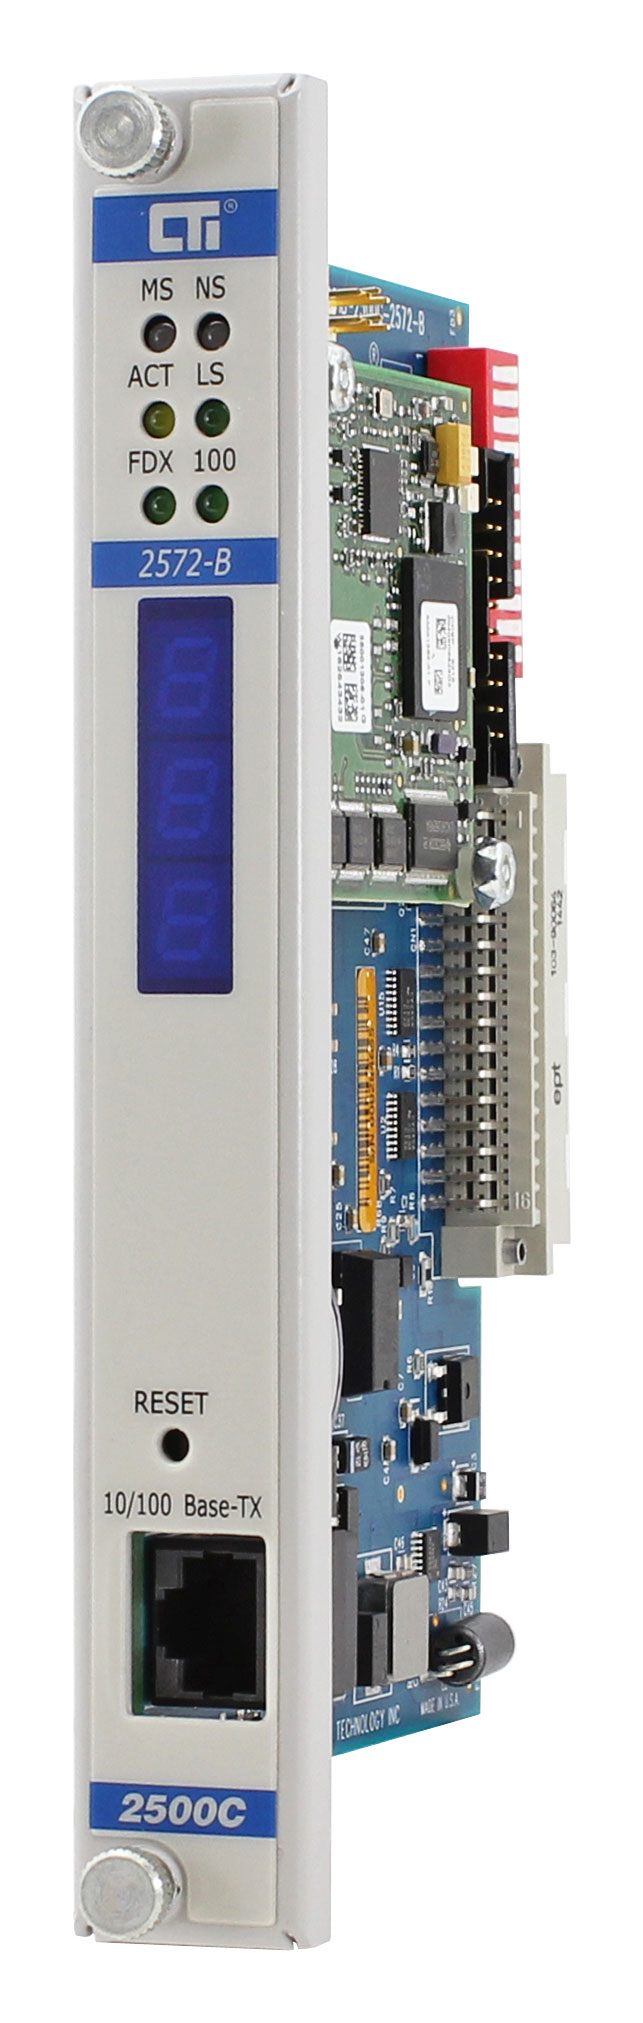 2500C-2572-B Fast Ethernet TCP/IP Adapter